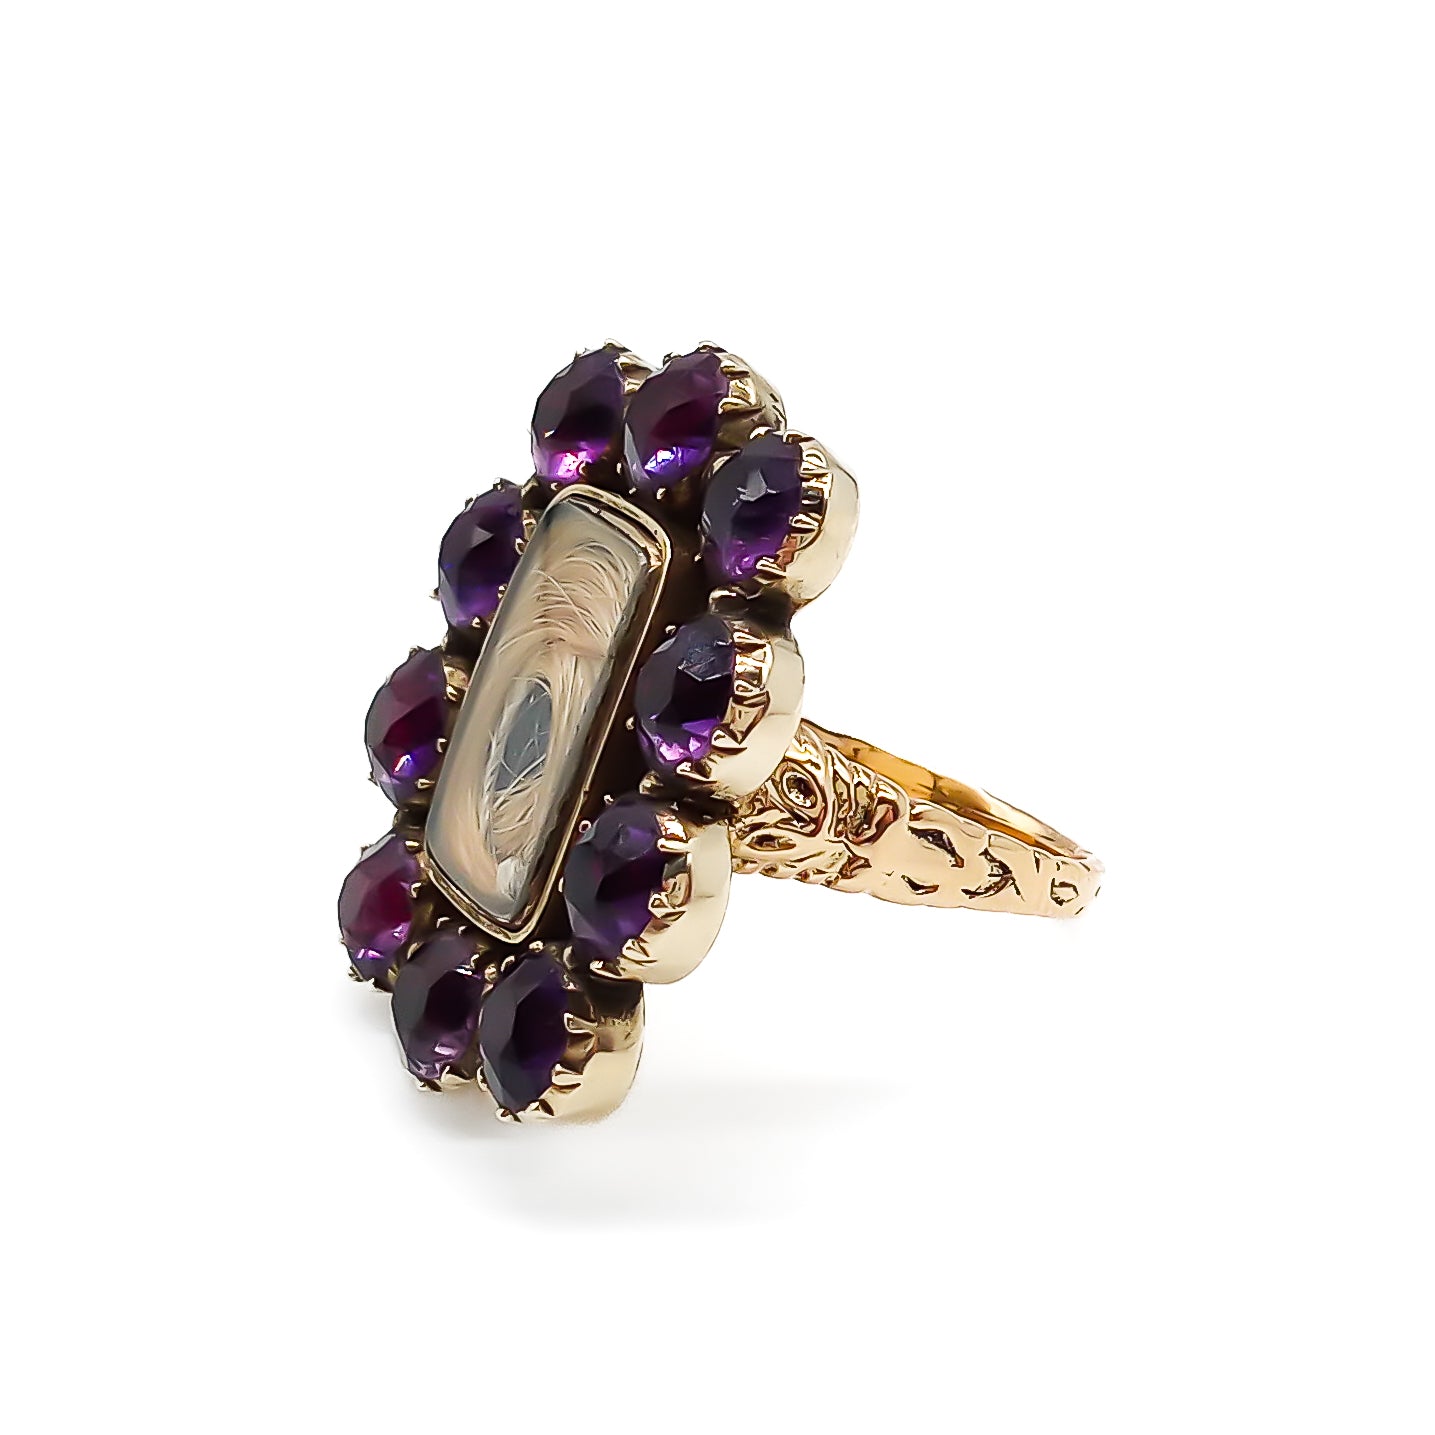 Gorgeous Georgian mourning ring comprising of a 15ct yellow gold setting with hair under glass, surrounded by ten deep purple amethysts. Beautifully engraved later shank.